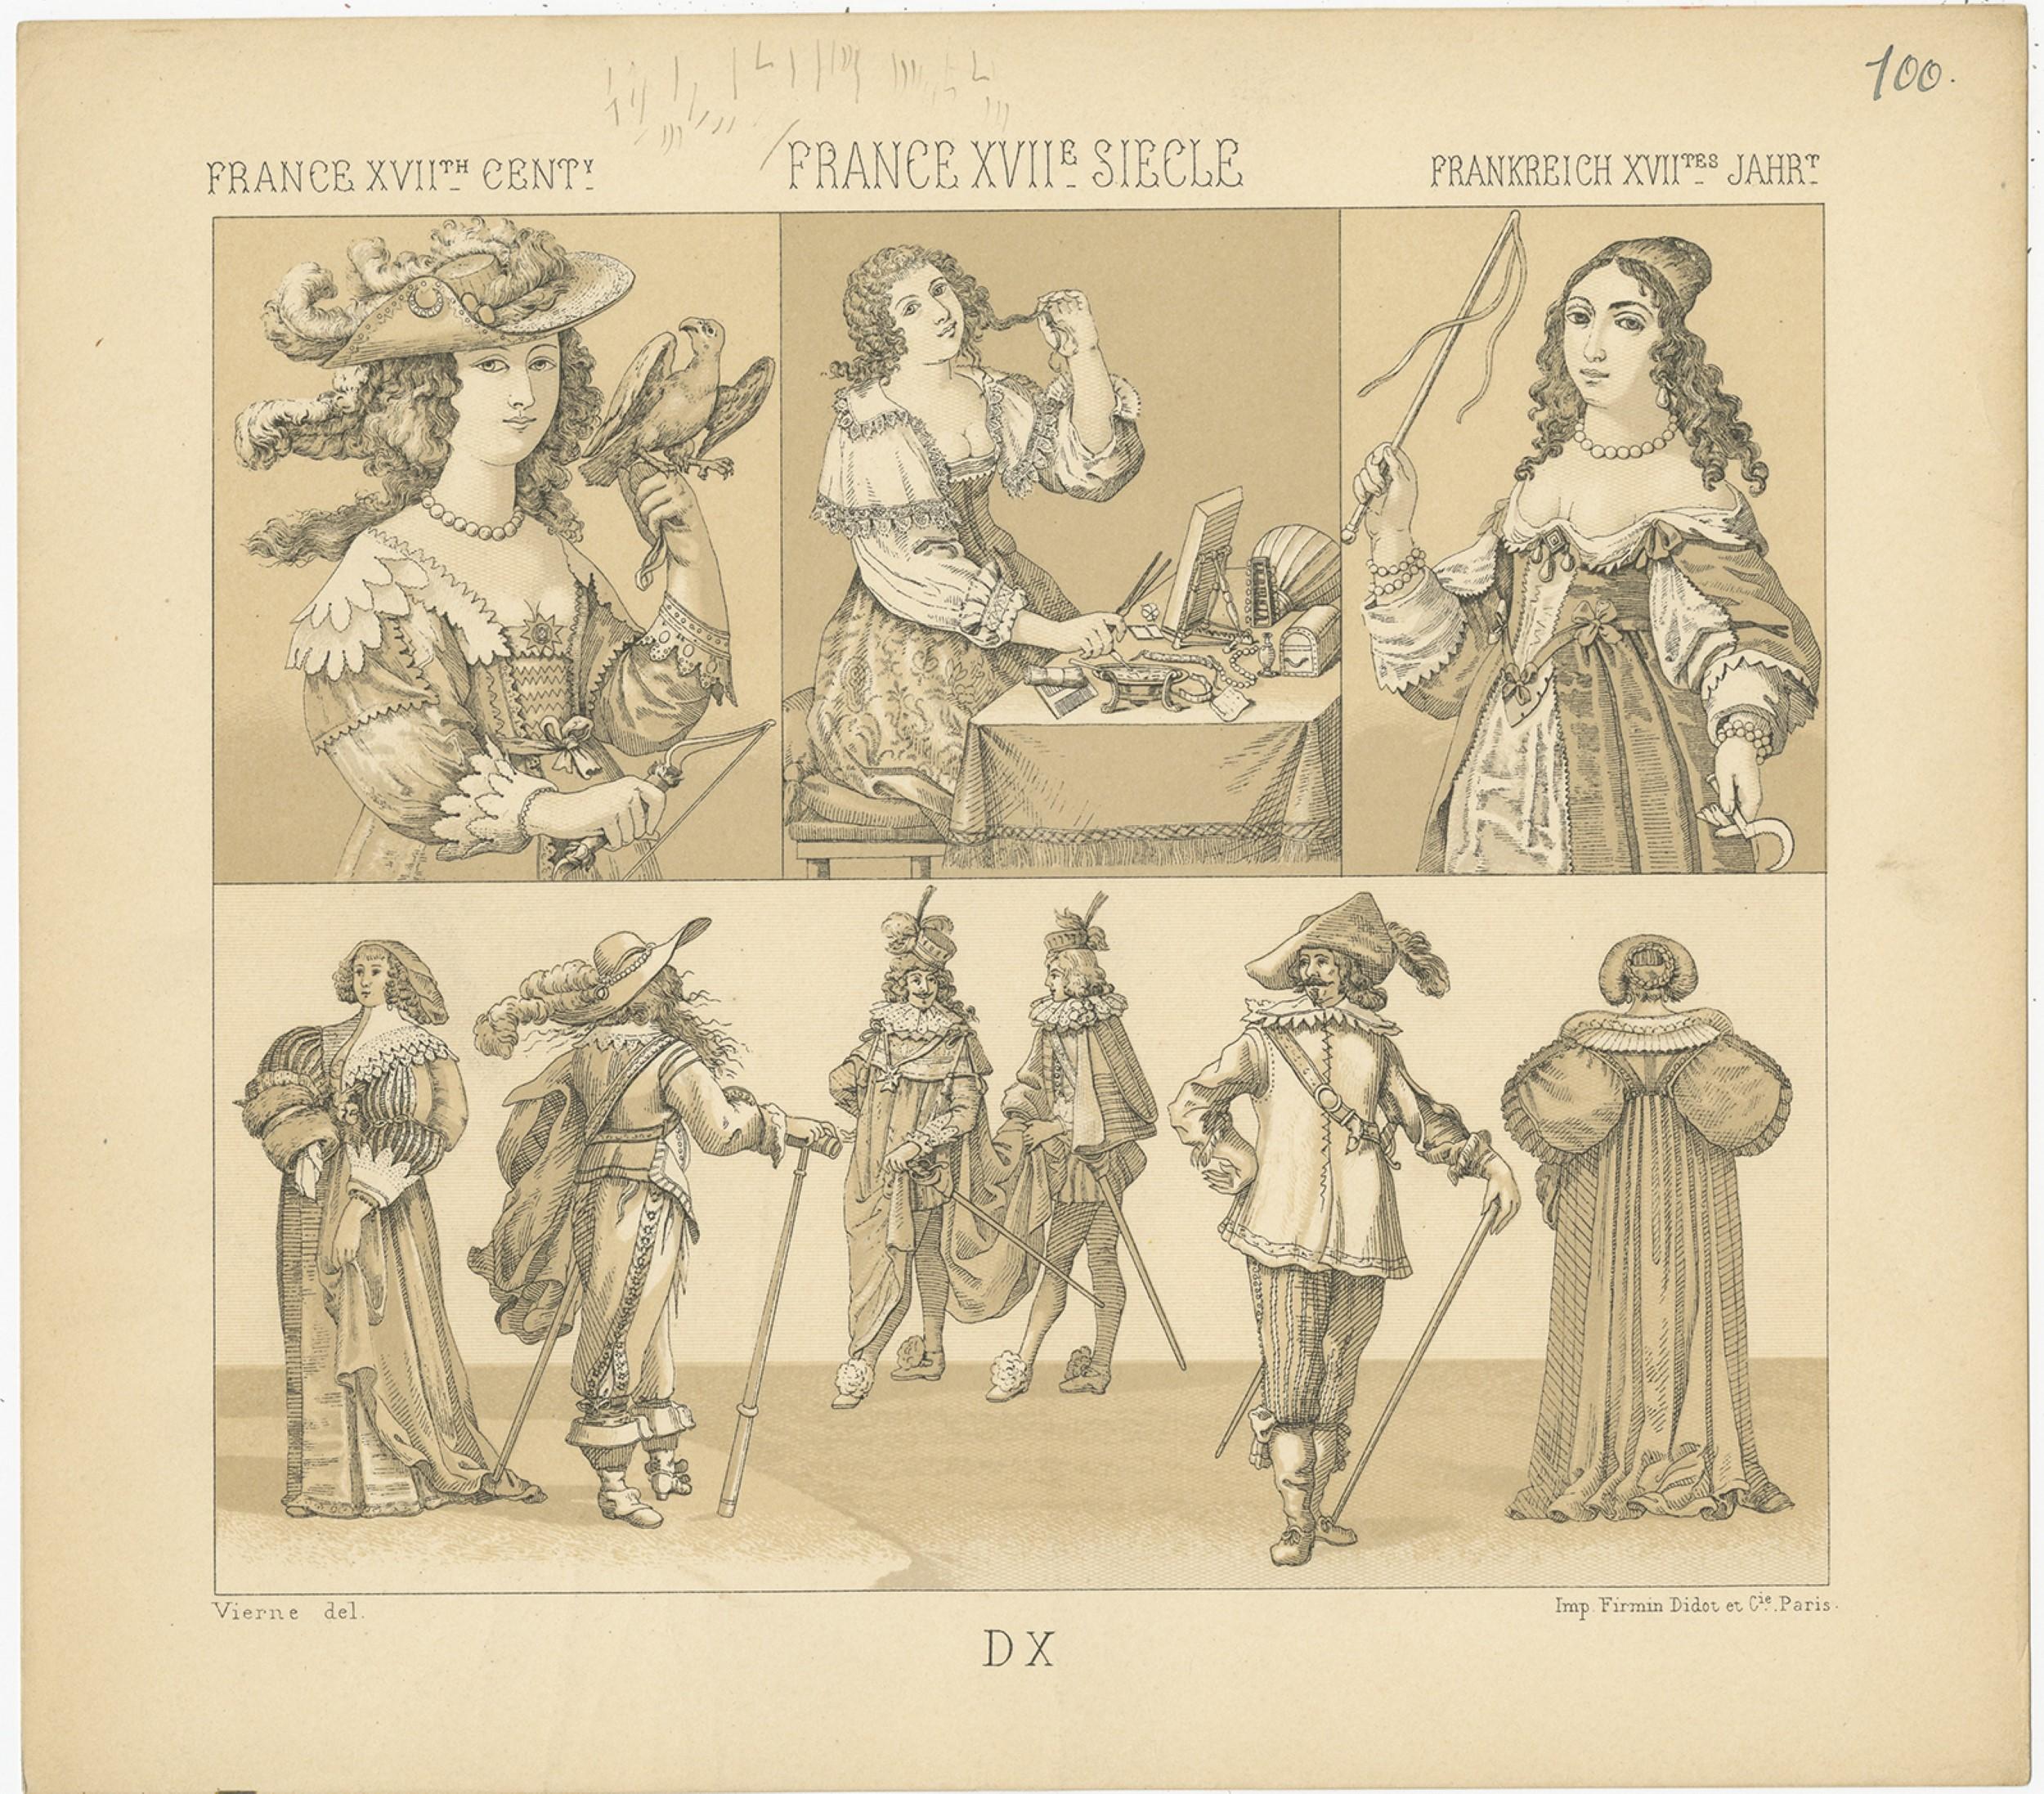 Antique print titled 'France XVIIth Cent - France XVIIe Siecle - Frankreich XVIItes Jahr'. Chromolithograph of French XVIIth Century Costumes. This print originates from 'Le Costume Historique' by M.A. Racinet. Published, circa 1880.